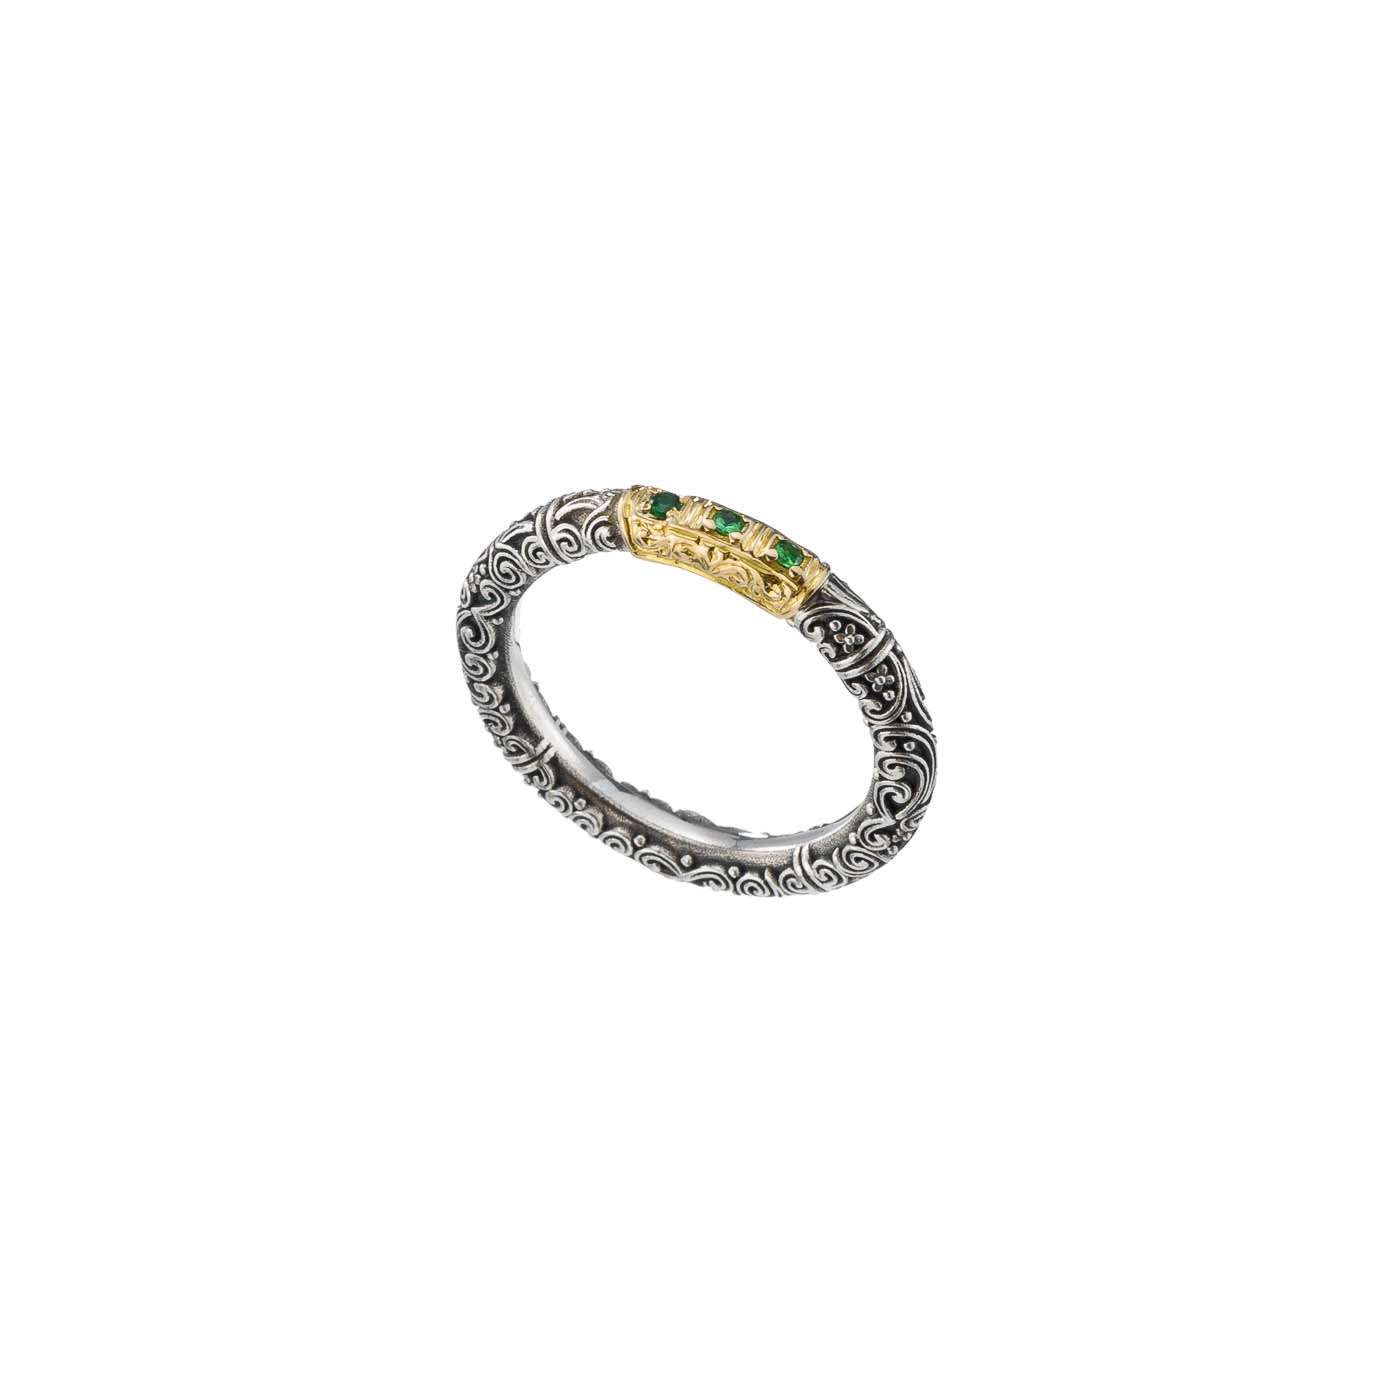 Eve band ring in 18K Gold and Sterling Silver with gemstones